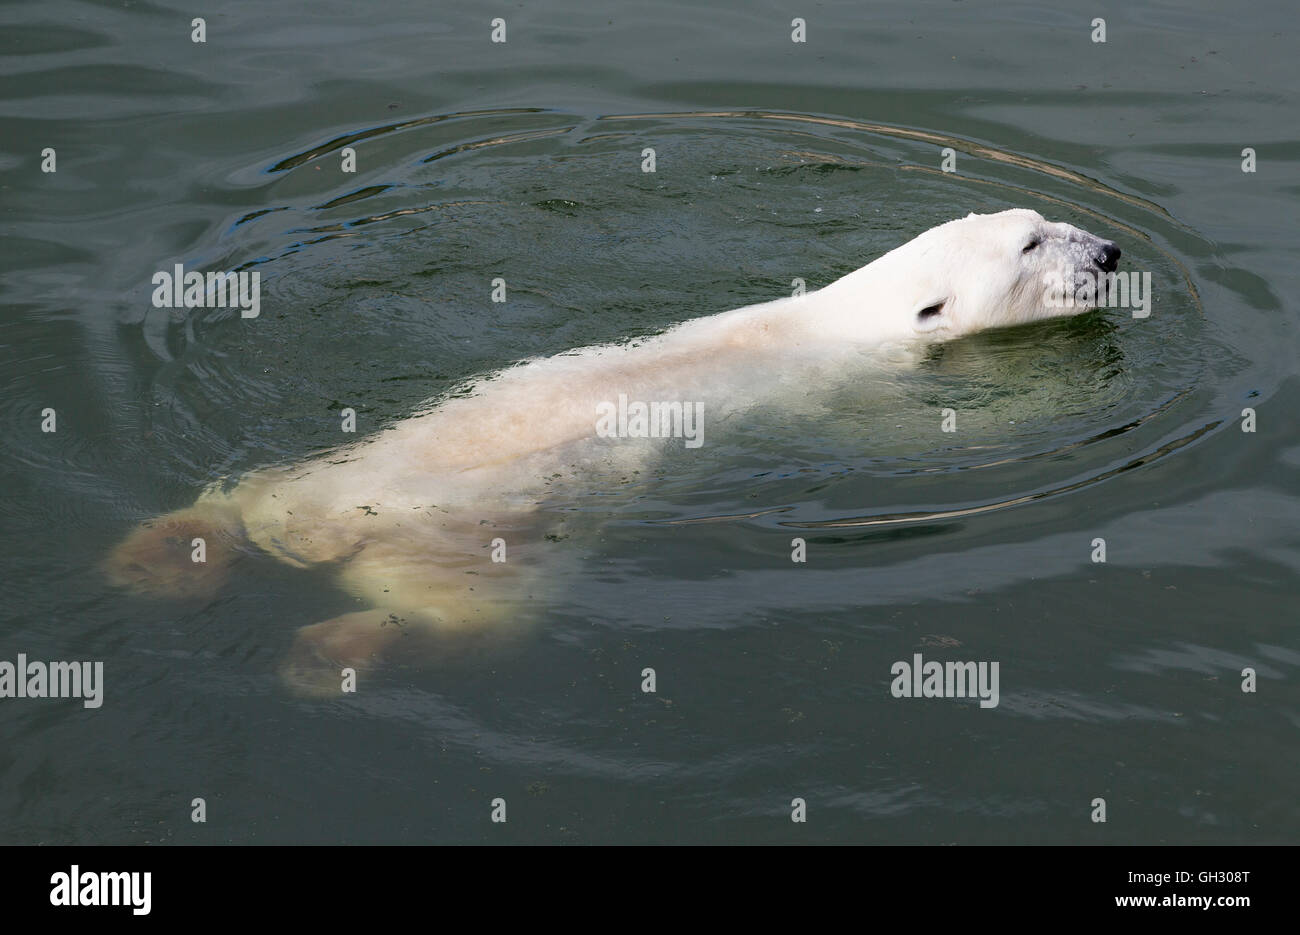 Polar bear in a water, swimming in Arctic Finland Stock Photo